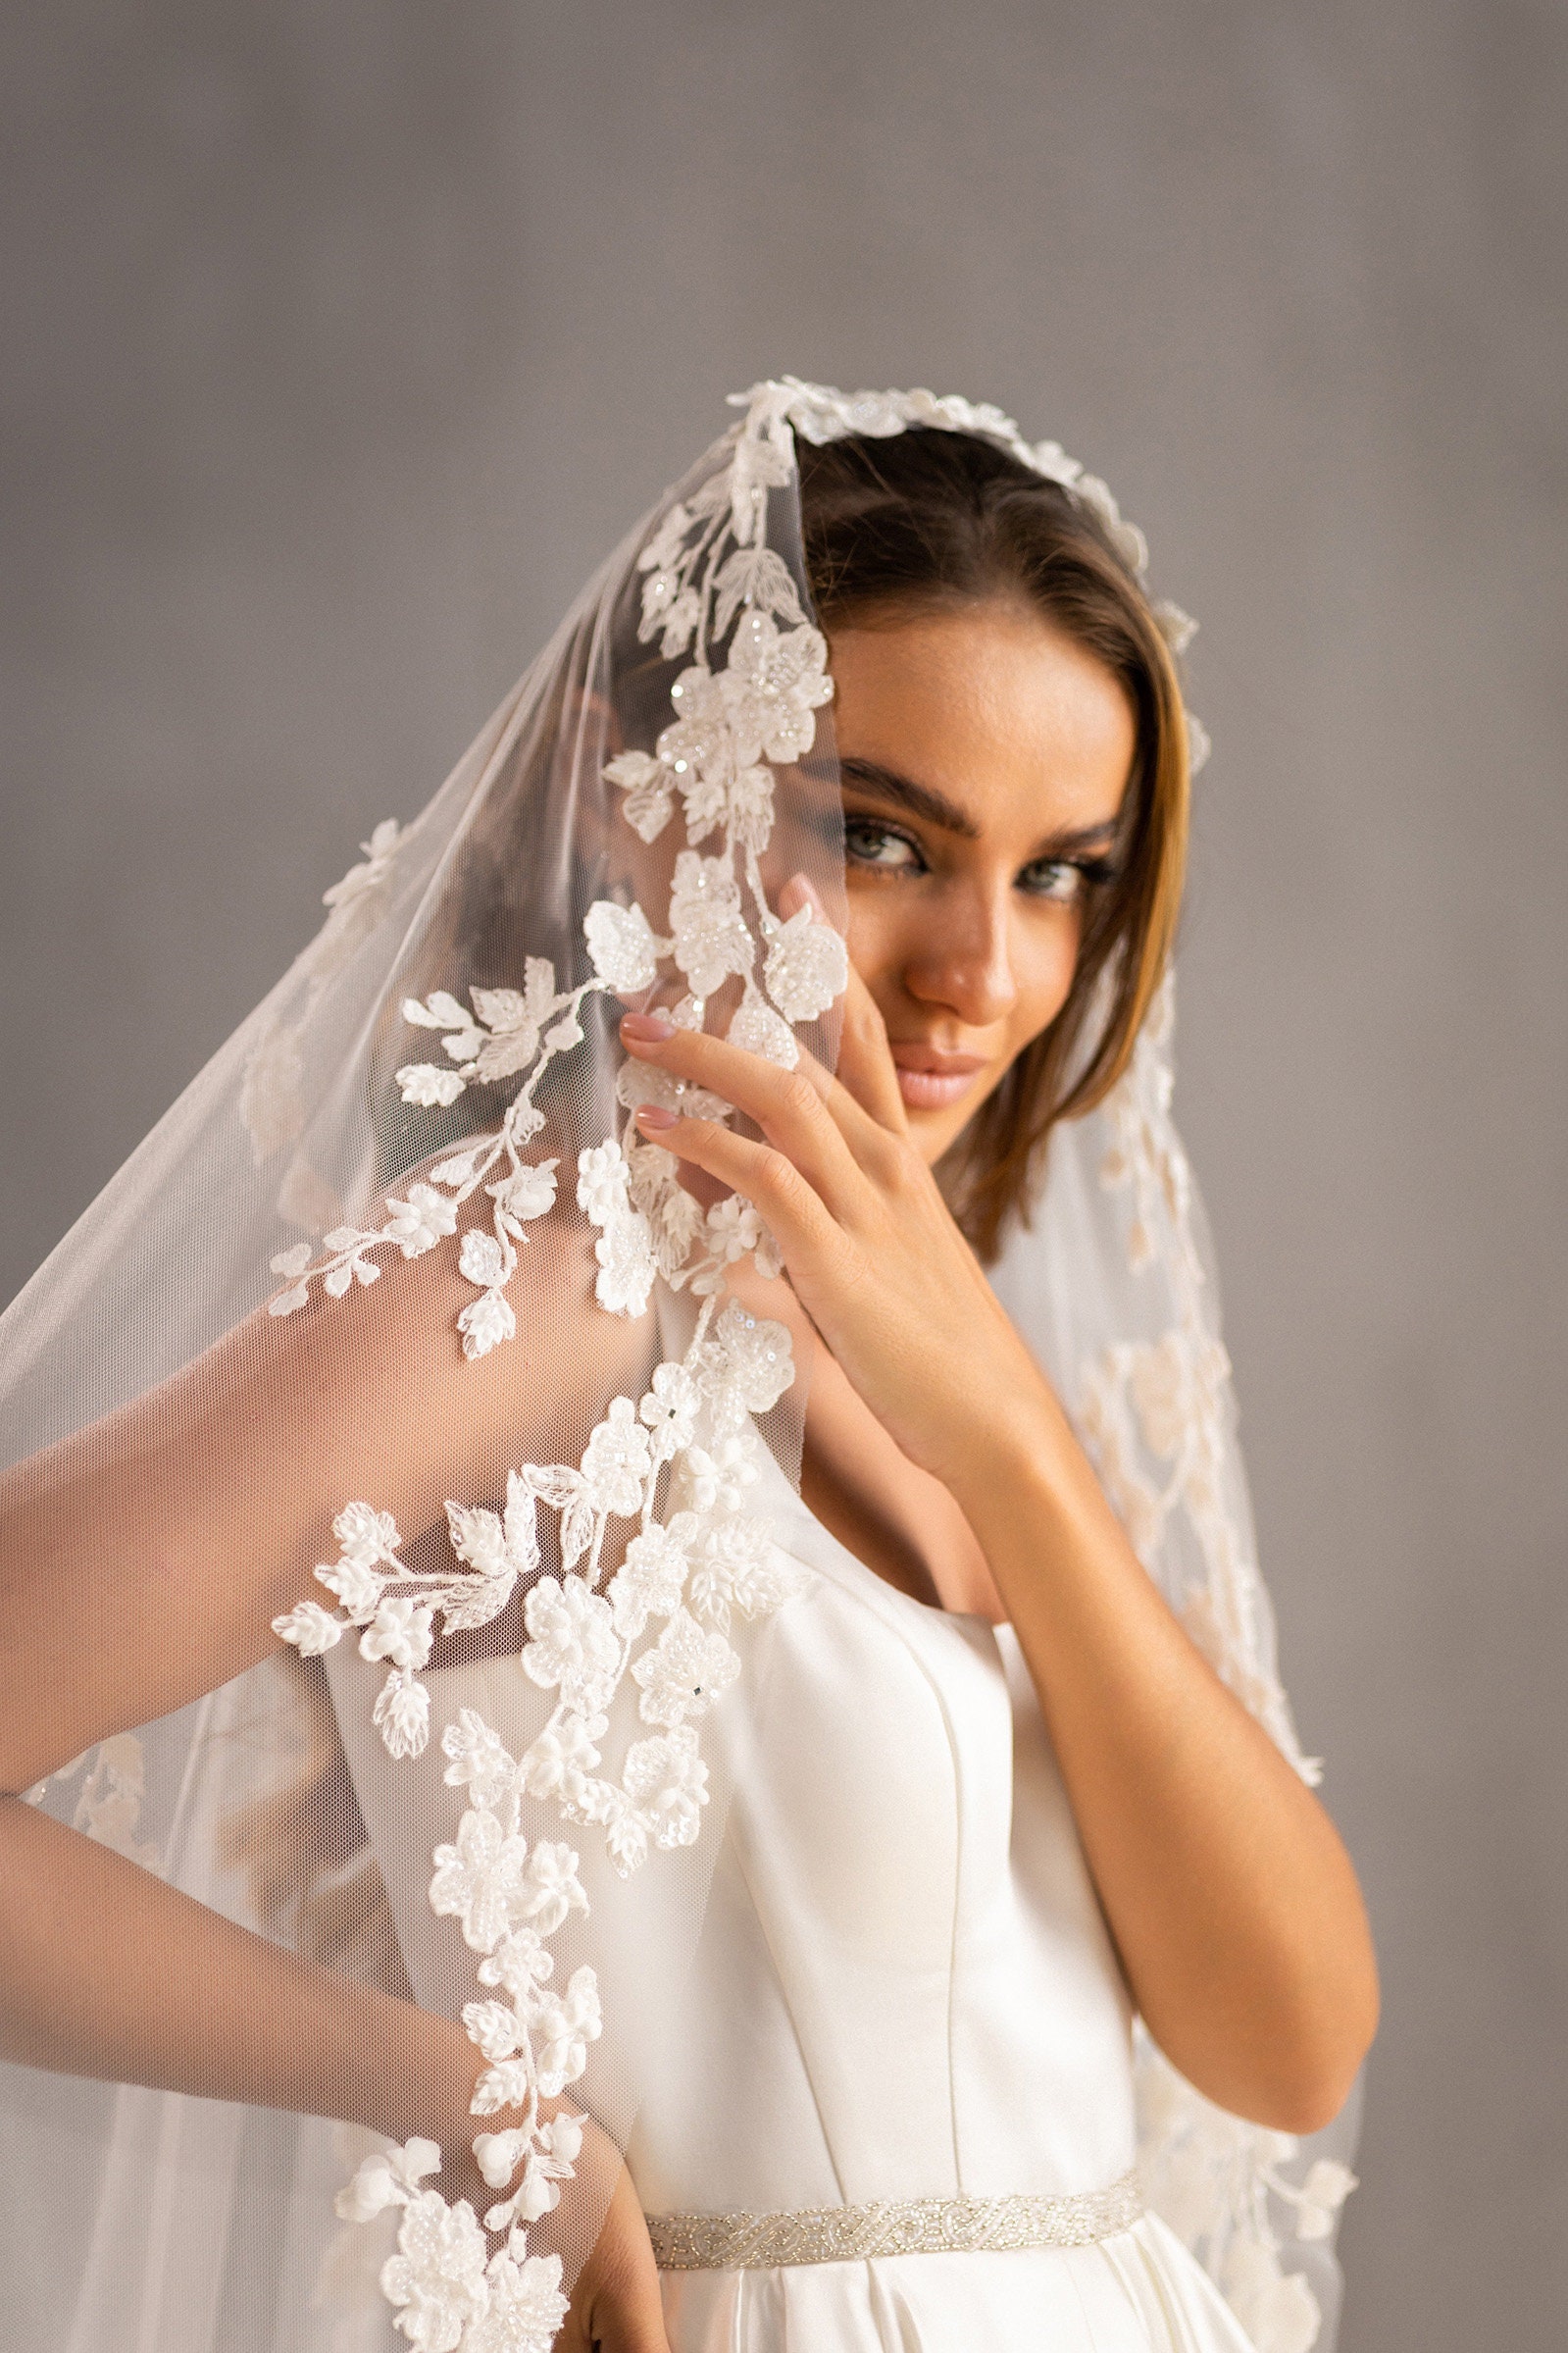 Lace Wedding Veil FN-056, 118 Inches Bridal Veil, Tulle Cathedral Length,  Veil With Comb, One Tier Veil, Bundle Veil 